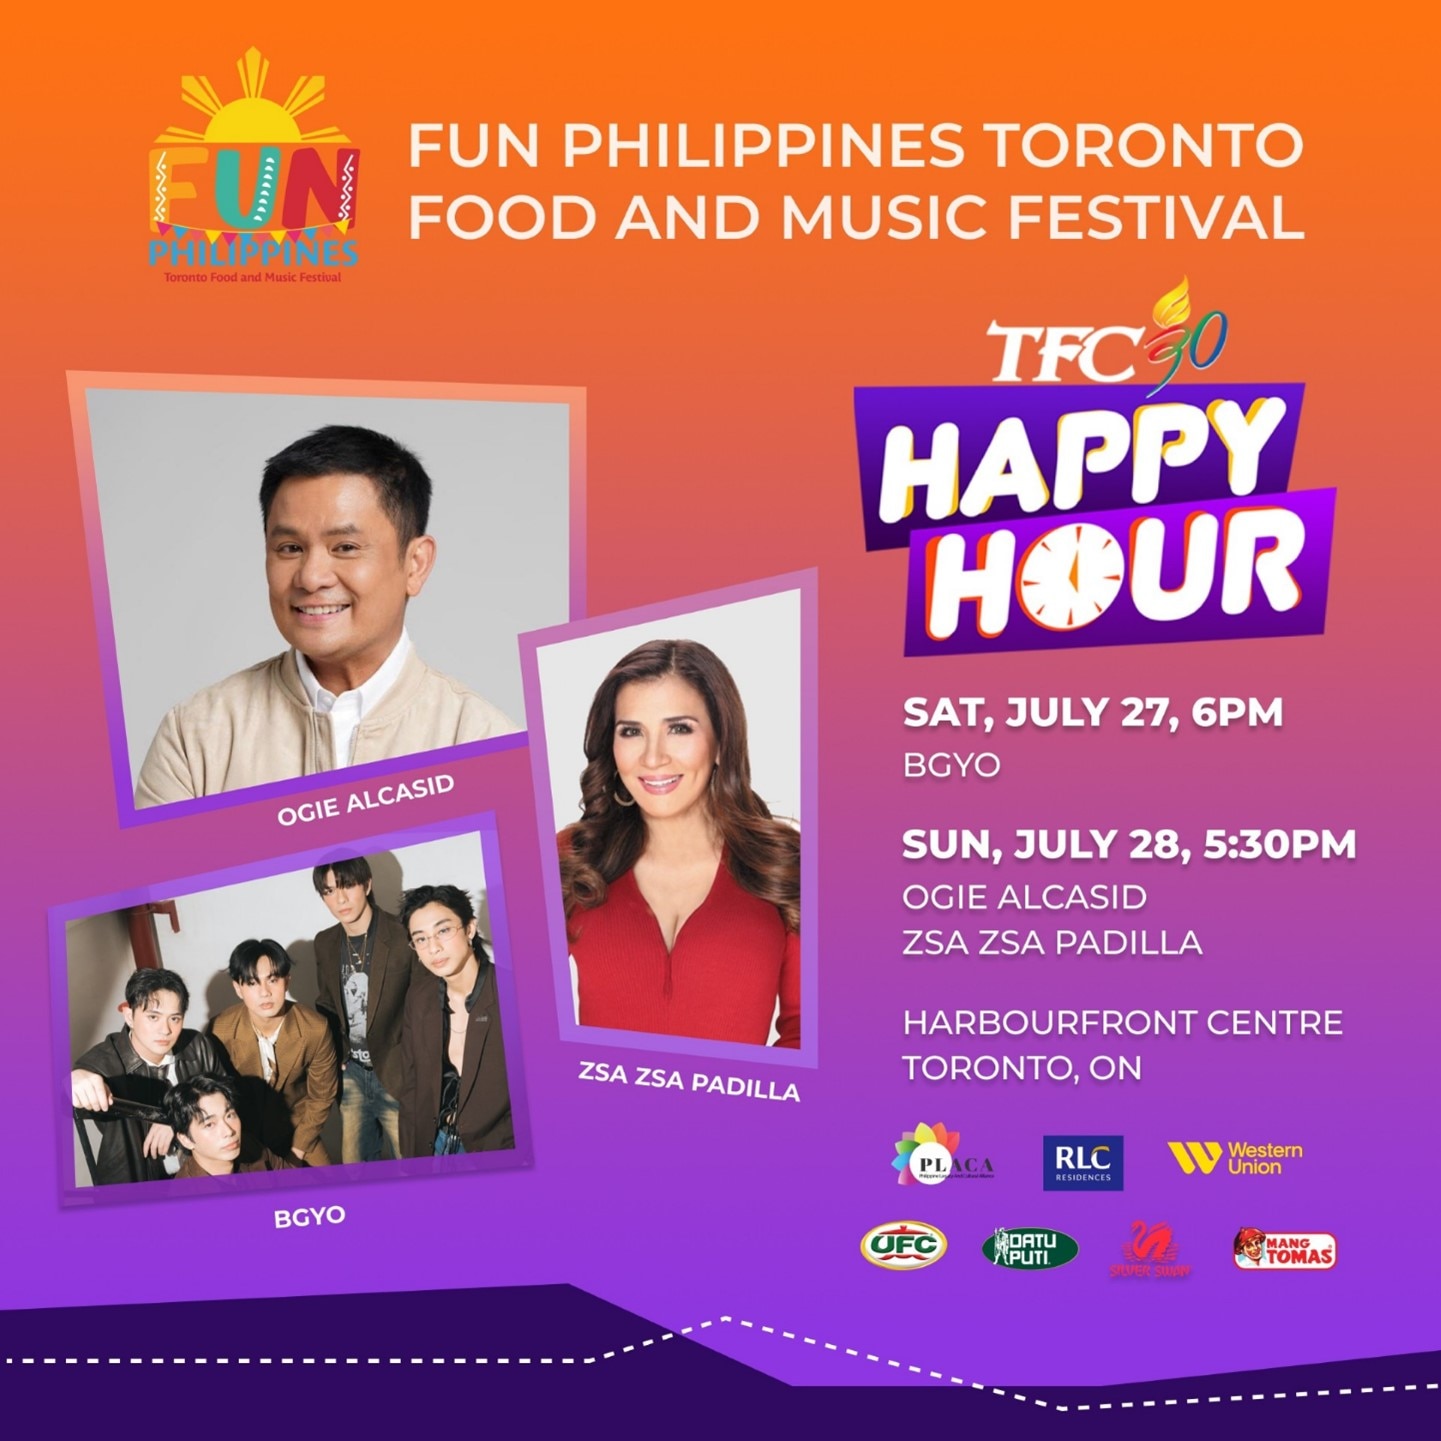 OPM icons Ogie, Zsa Zsa headline TFC30 Happy Hour, MYX presents BGYO   at the 3rd Fun Philippines Toronto Food & Music Festival on July 26-28